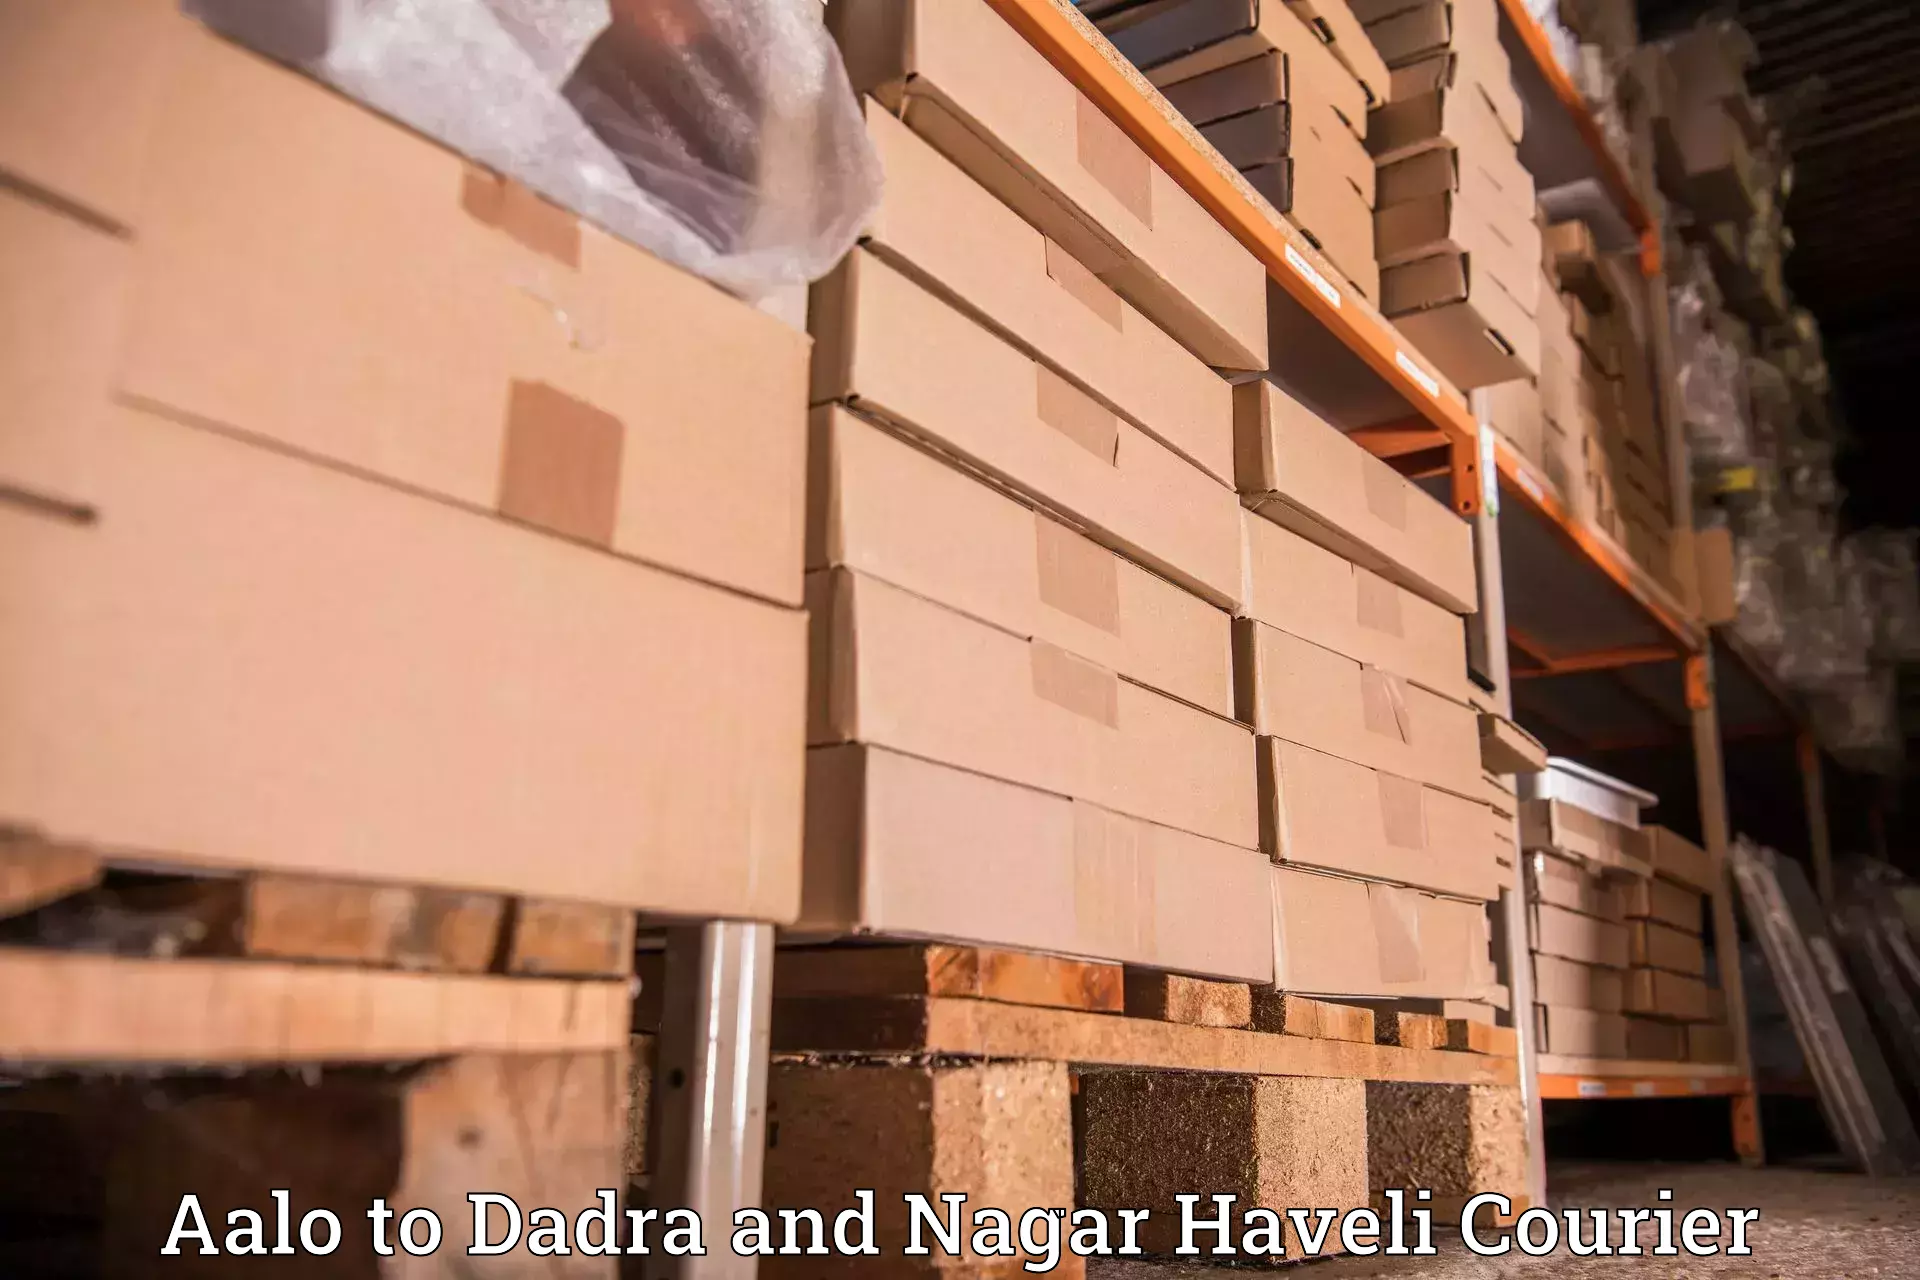 International courier networks Aalo to Dadra and Nagar Haveli